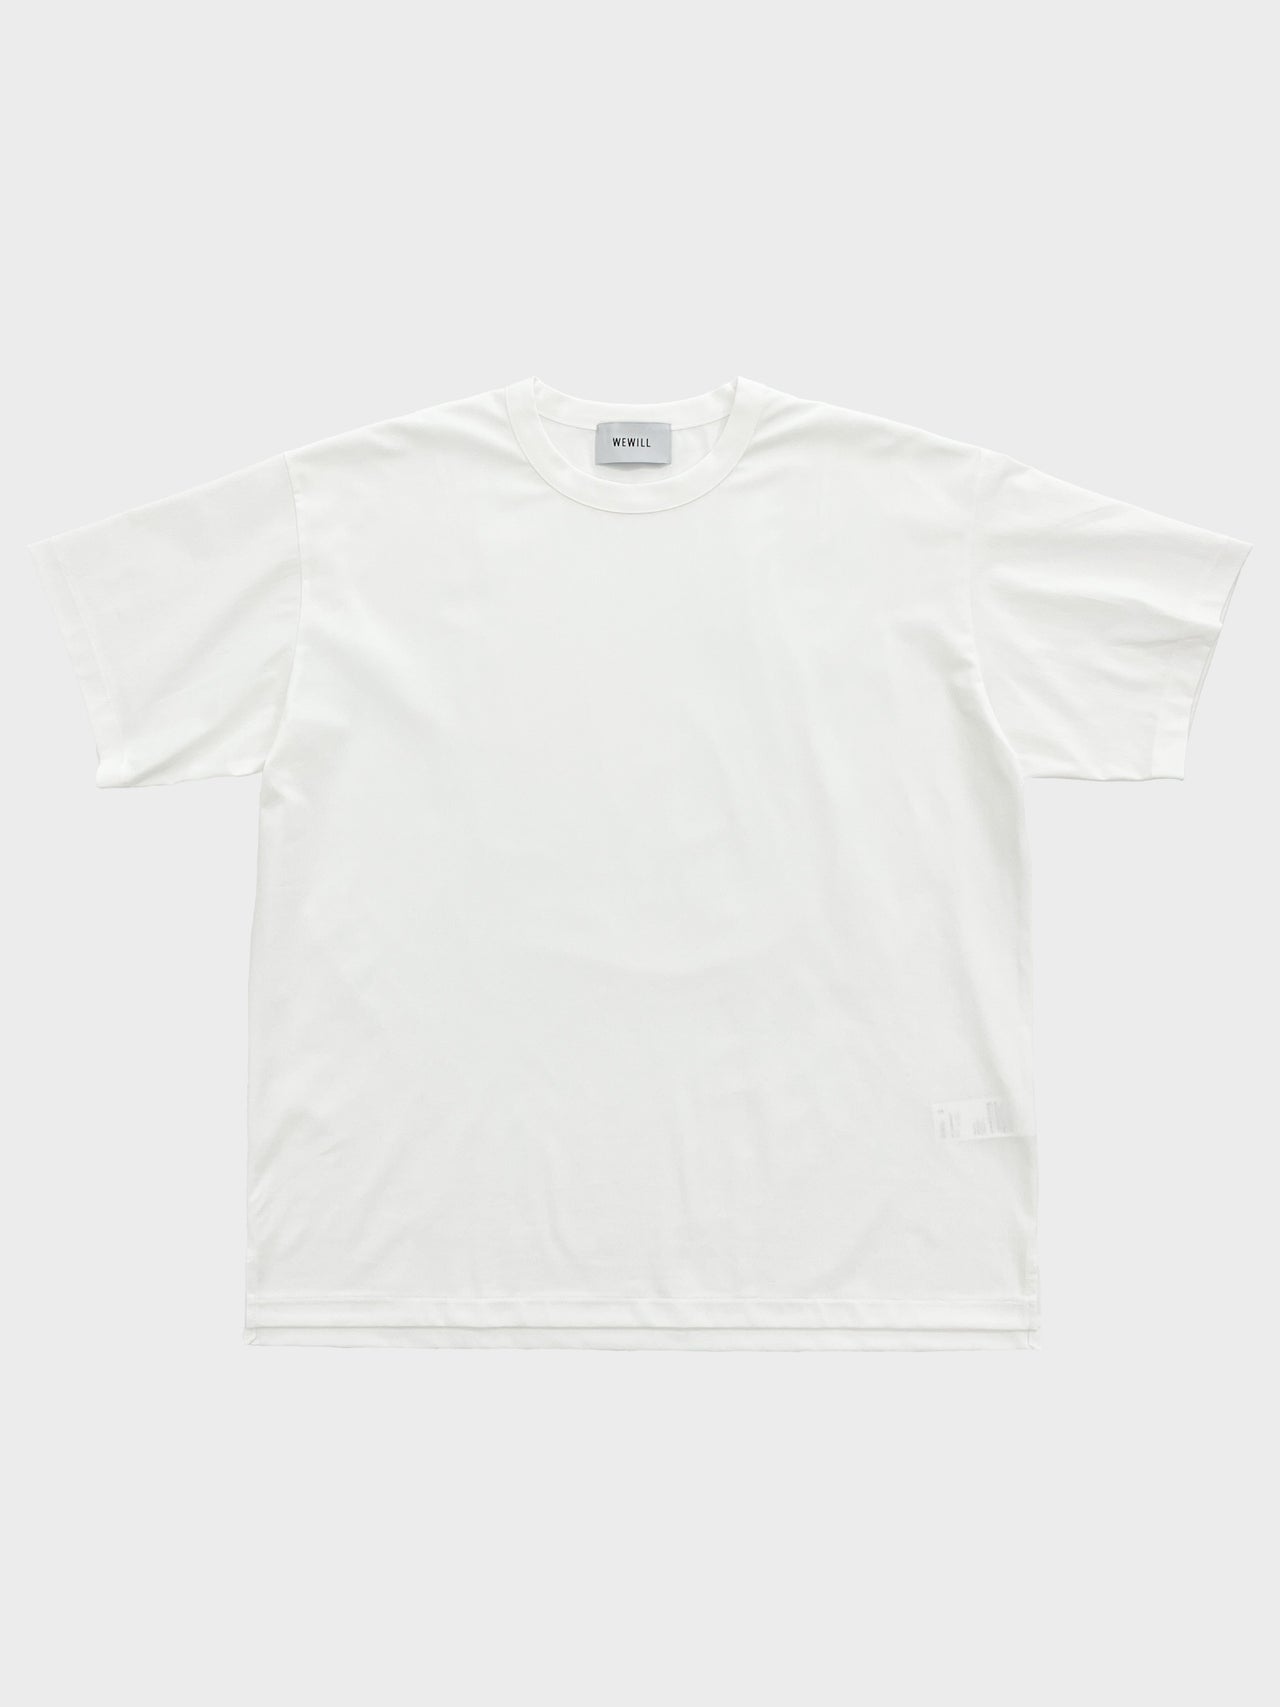 WEWILL / TRICOT T-SHIRT (WHITE)